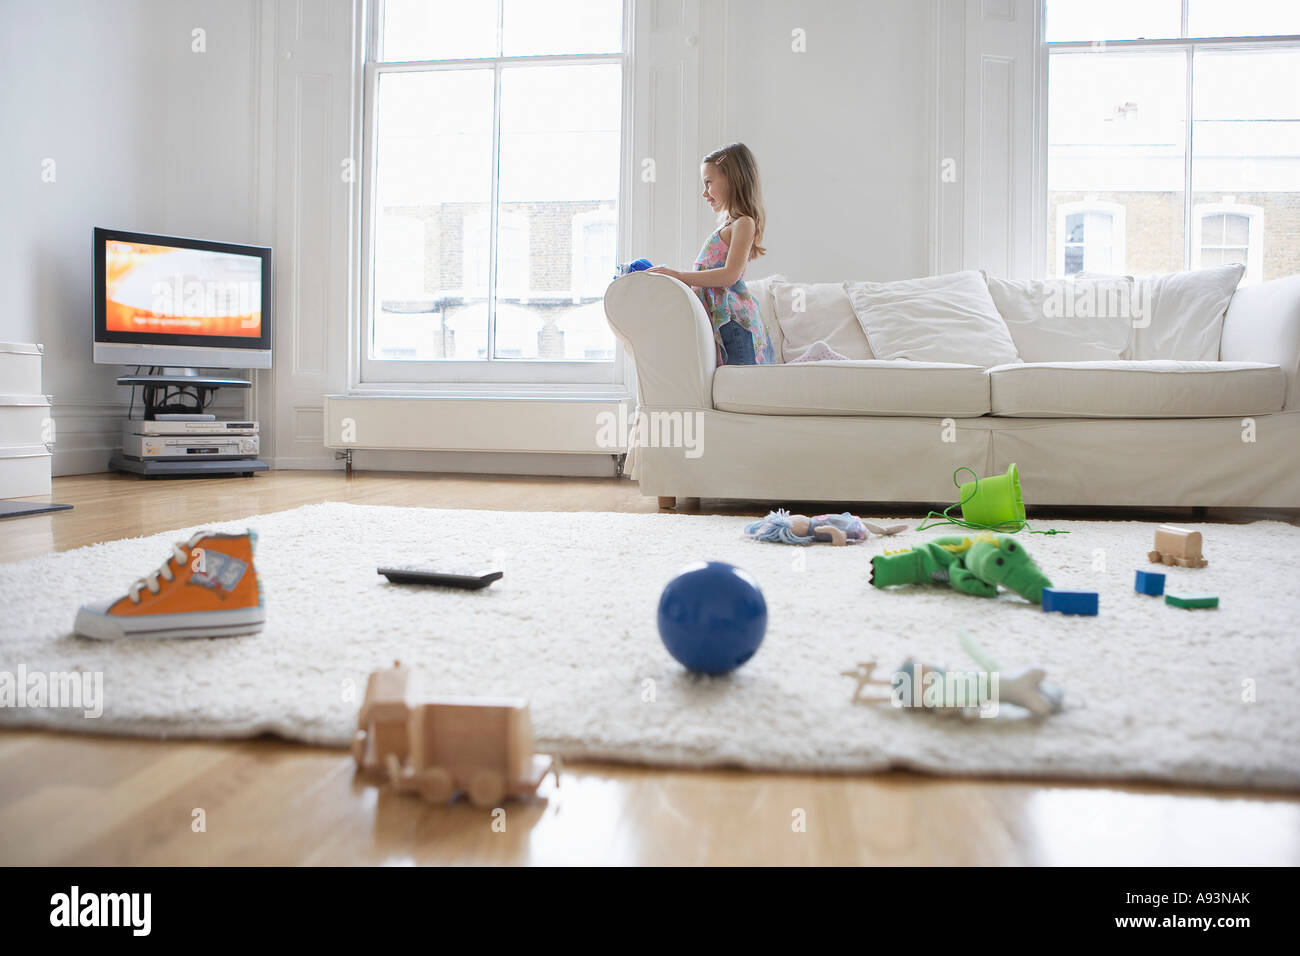 Girl (5-6) watching television, toys on floor in foreground Stock Photo